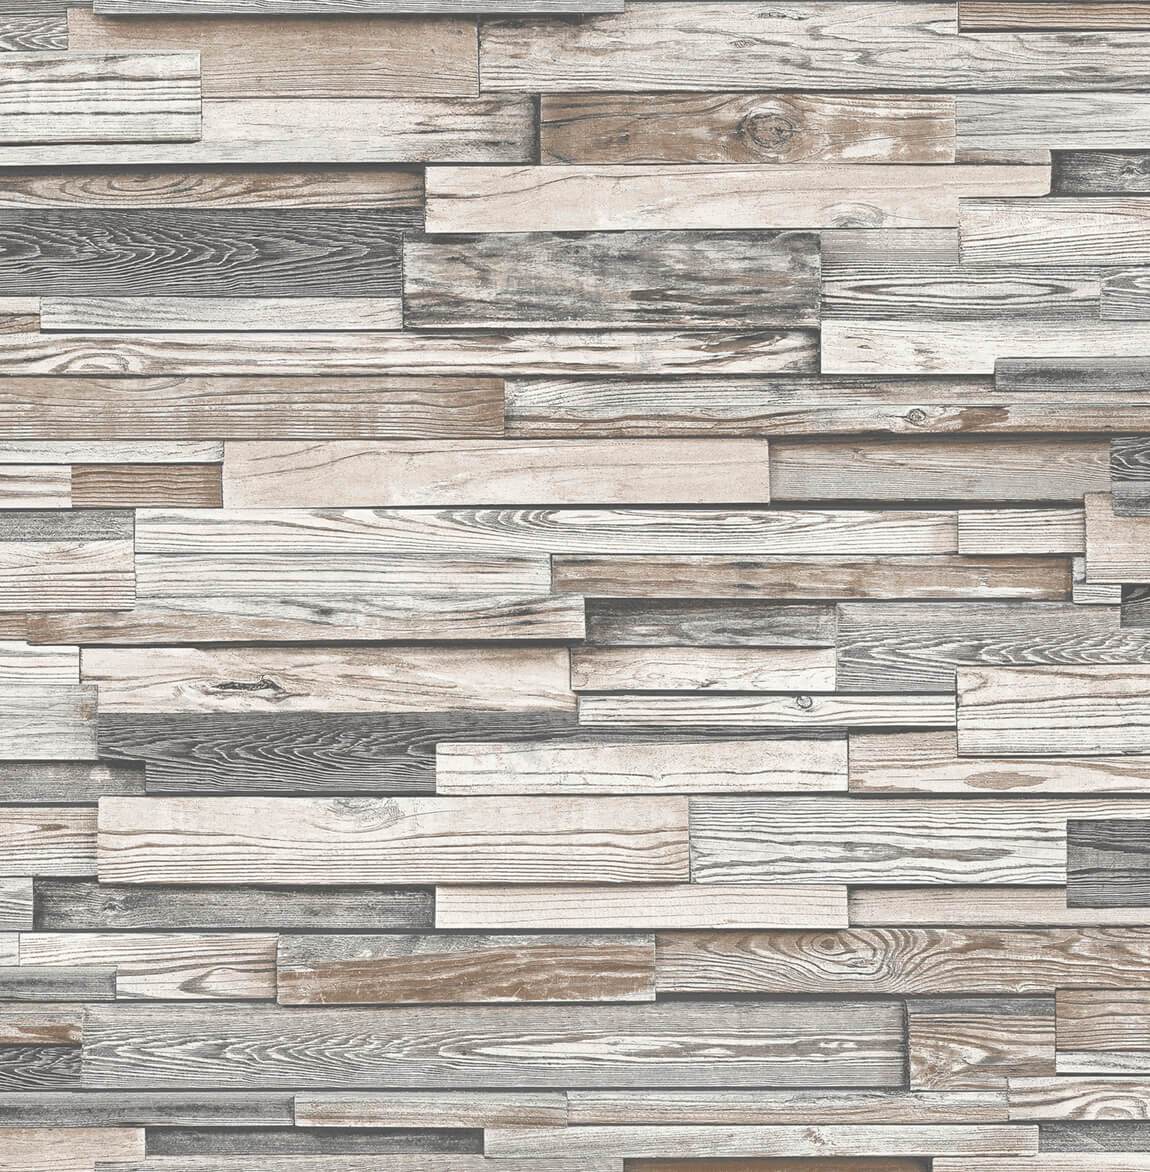 Reclaimed Wood Plank Peel And Stick Wallpaper In Light Grey And Brown